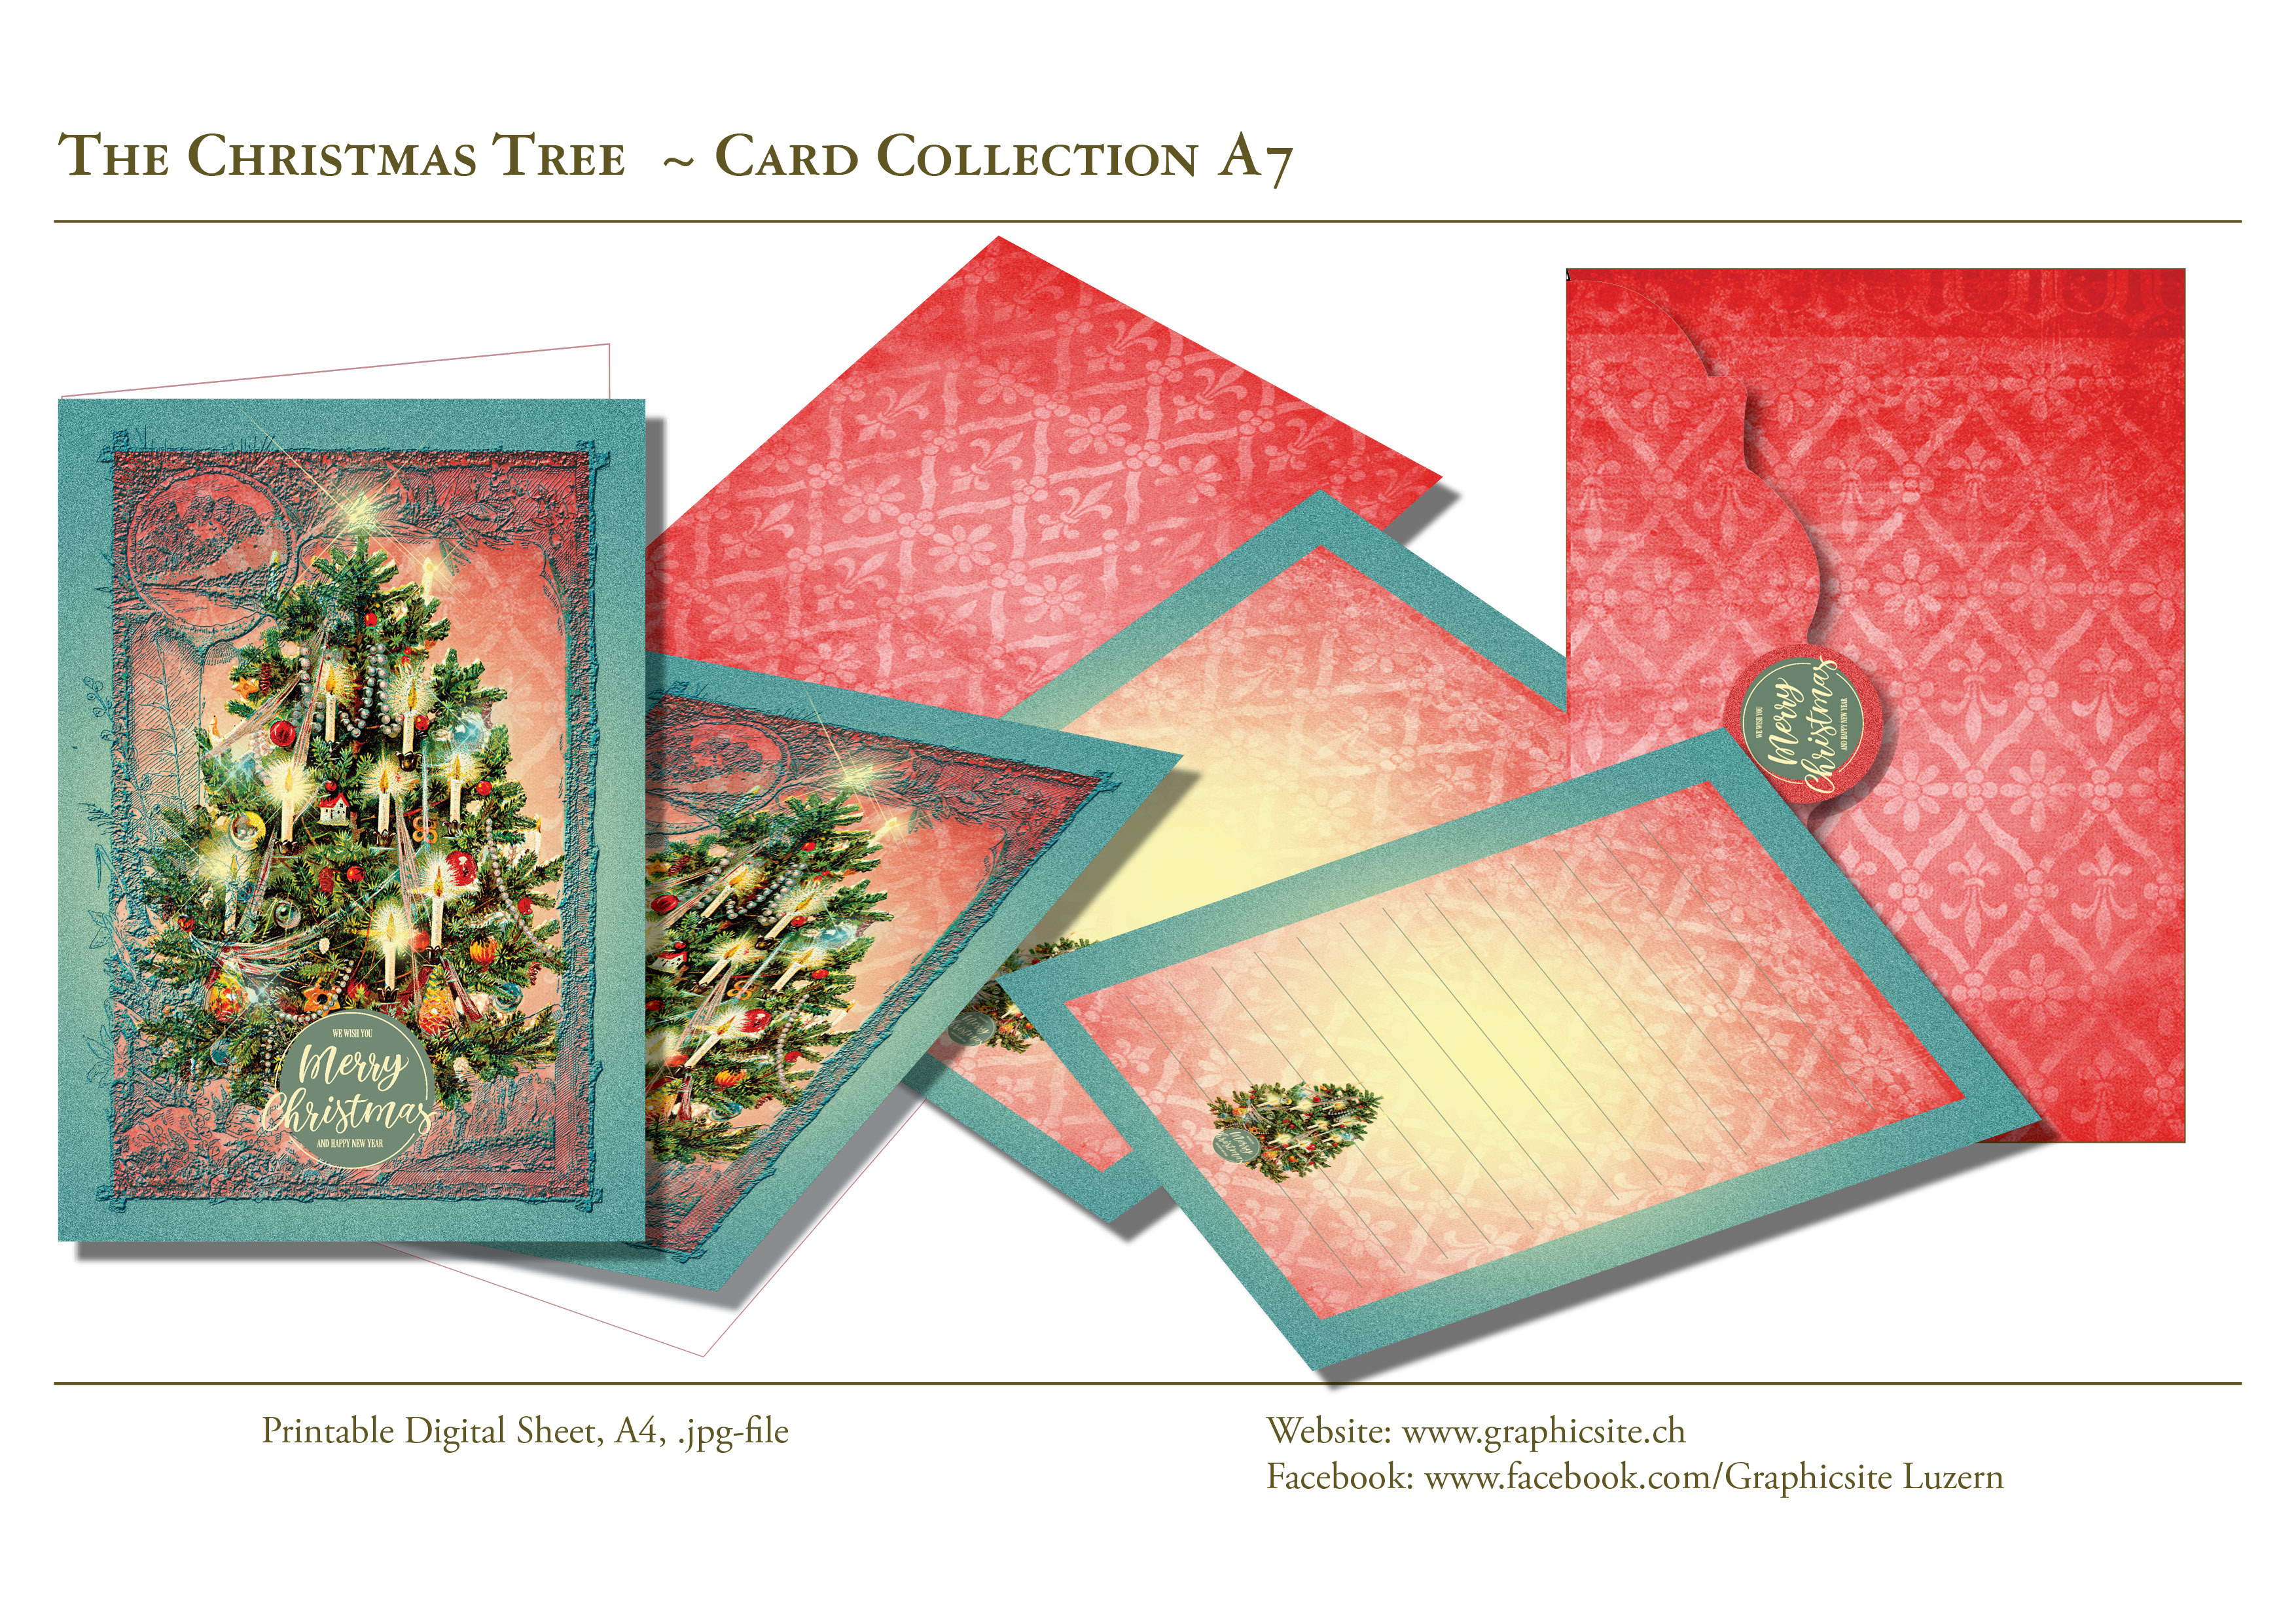 Printable Digital Sheets - Card Collection A7, Greeting Cards, Envelope, Notecards, Christmas, Tree, Lights, Holidays, Season, Graphic Design, Luzern, Schweiz,